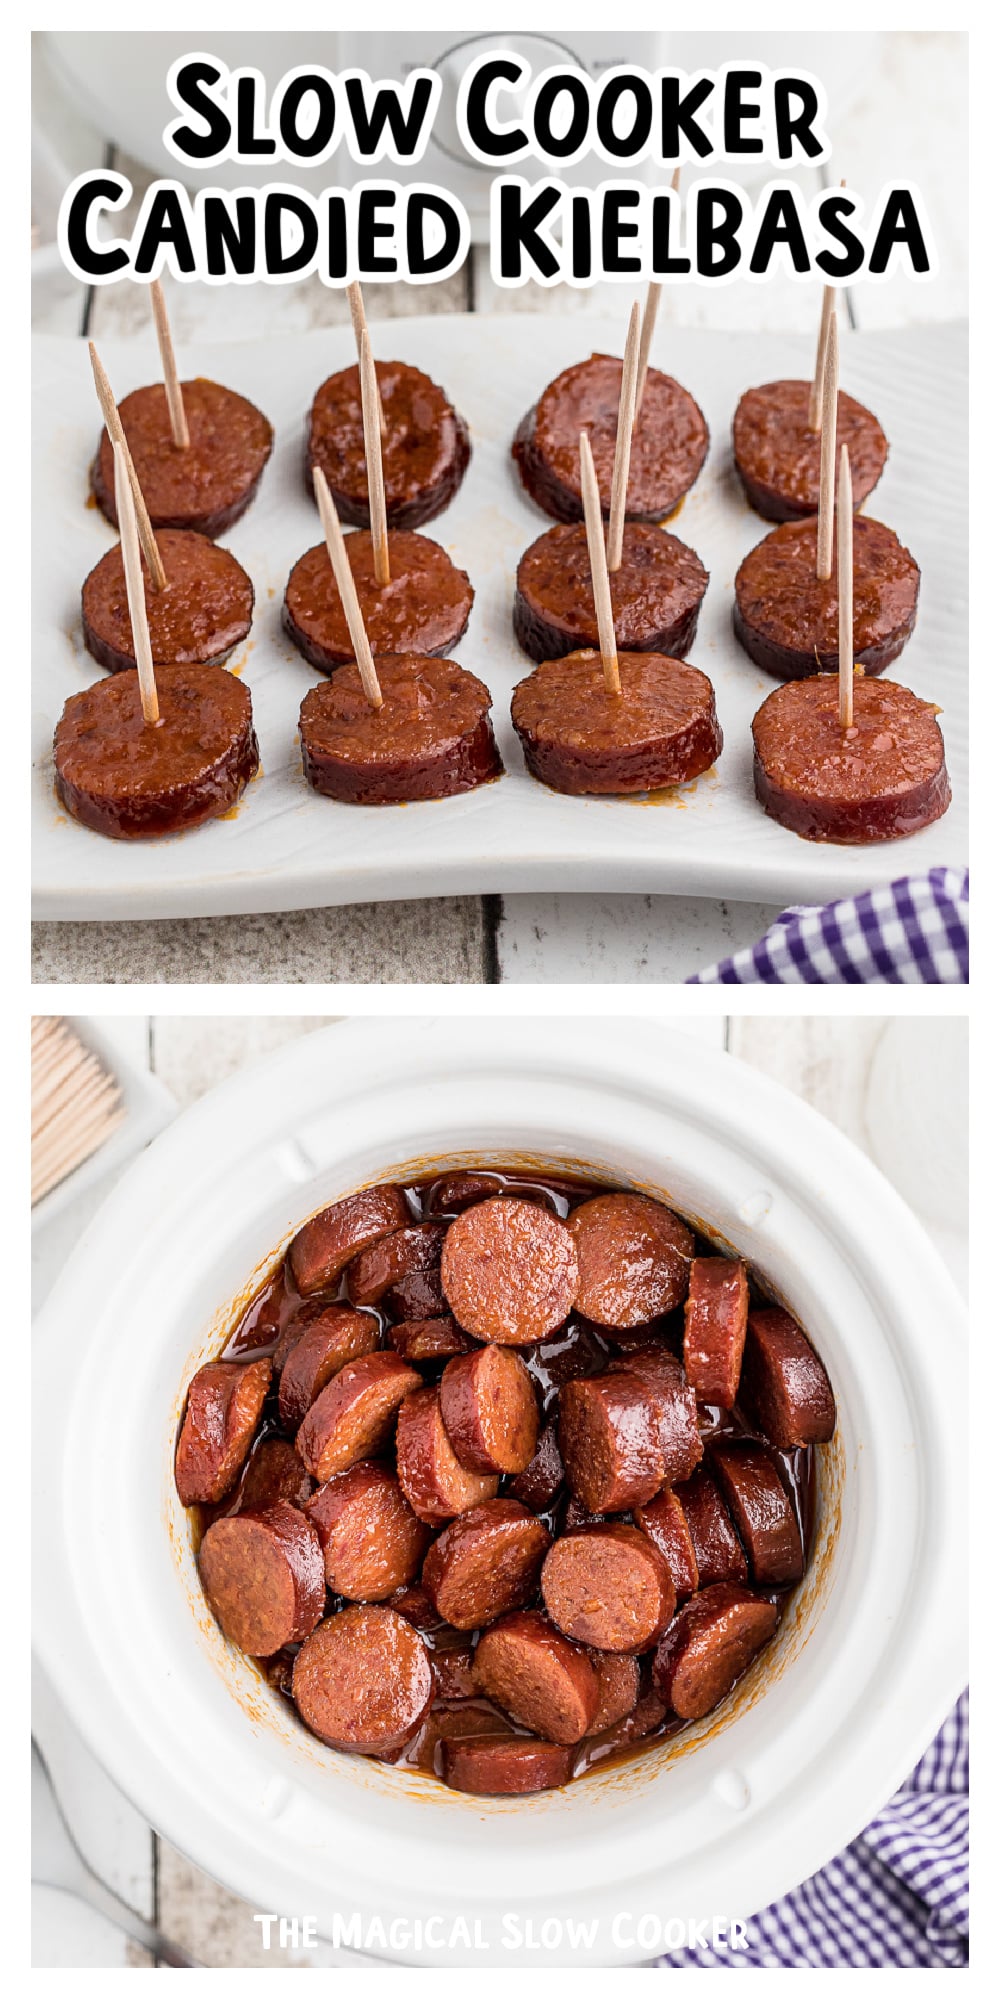 Long image of candied kielbasa for facebook.